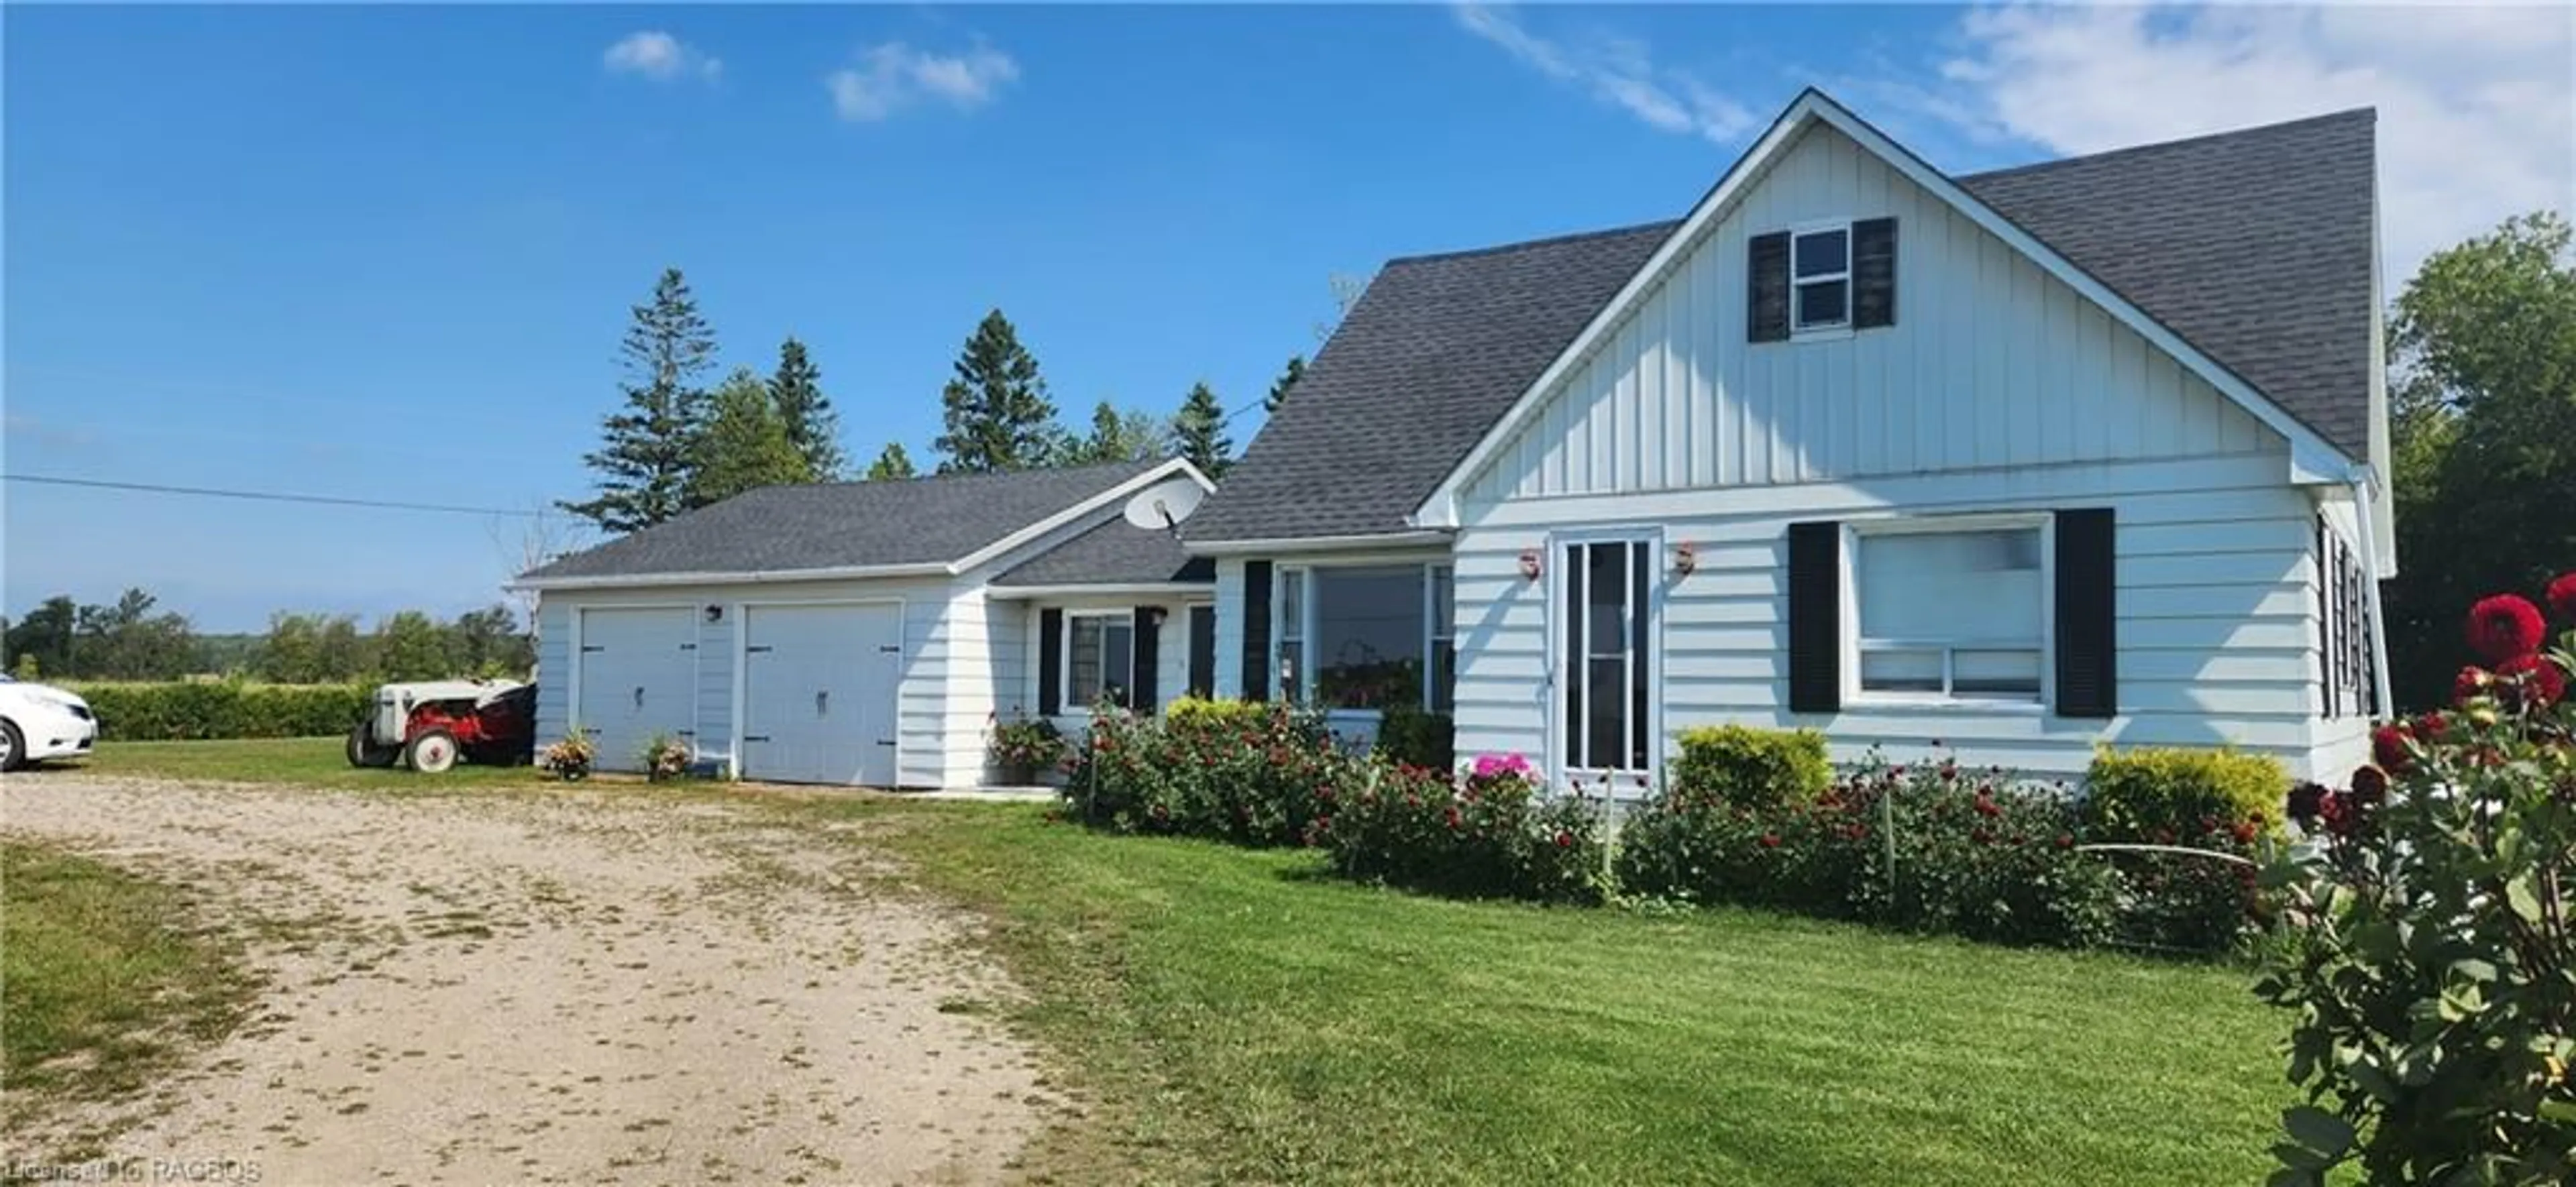 Cottage for 114 Lindsay Road 5, Northern Bruce Peninsula Ontario N0H 1W0